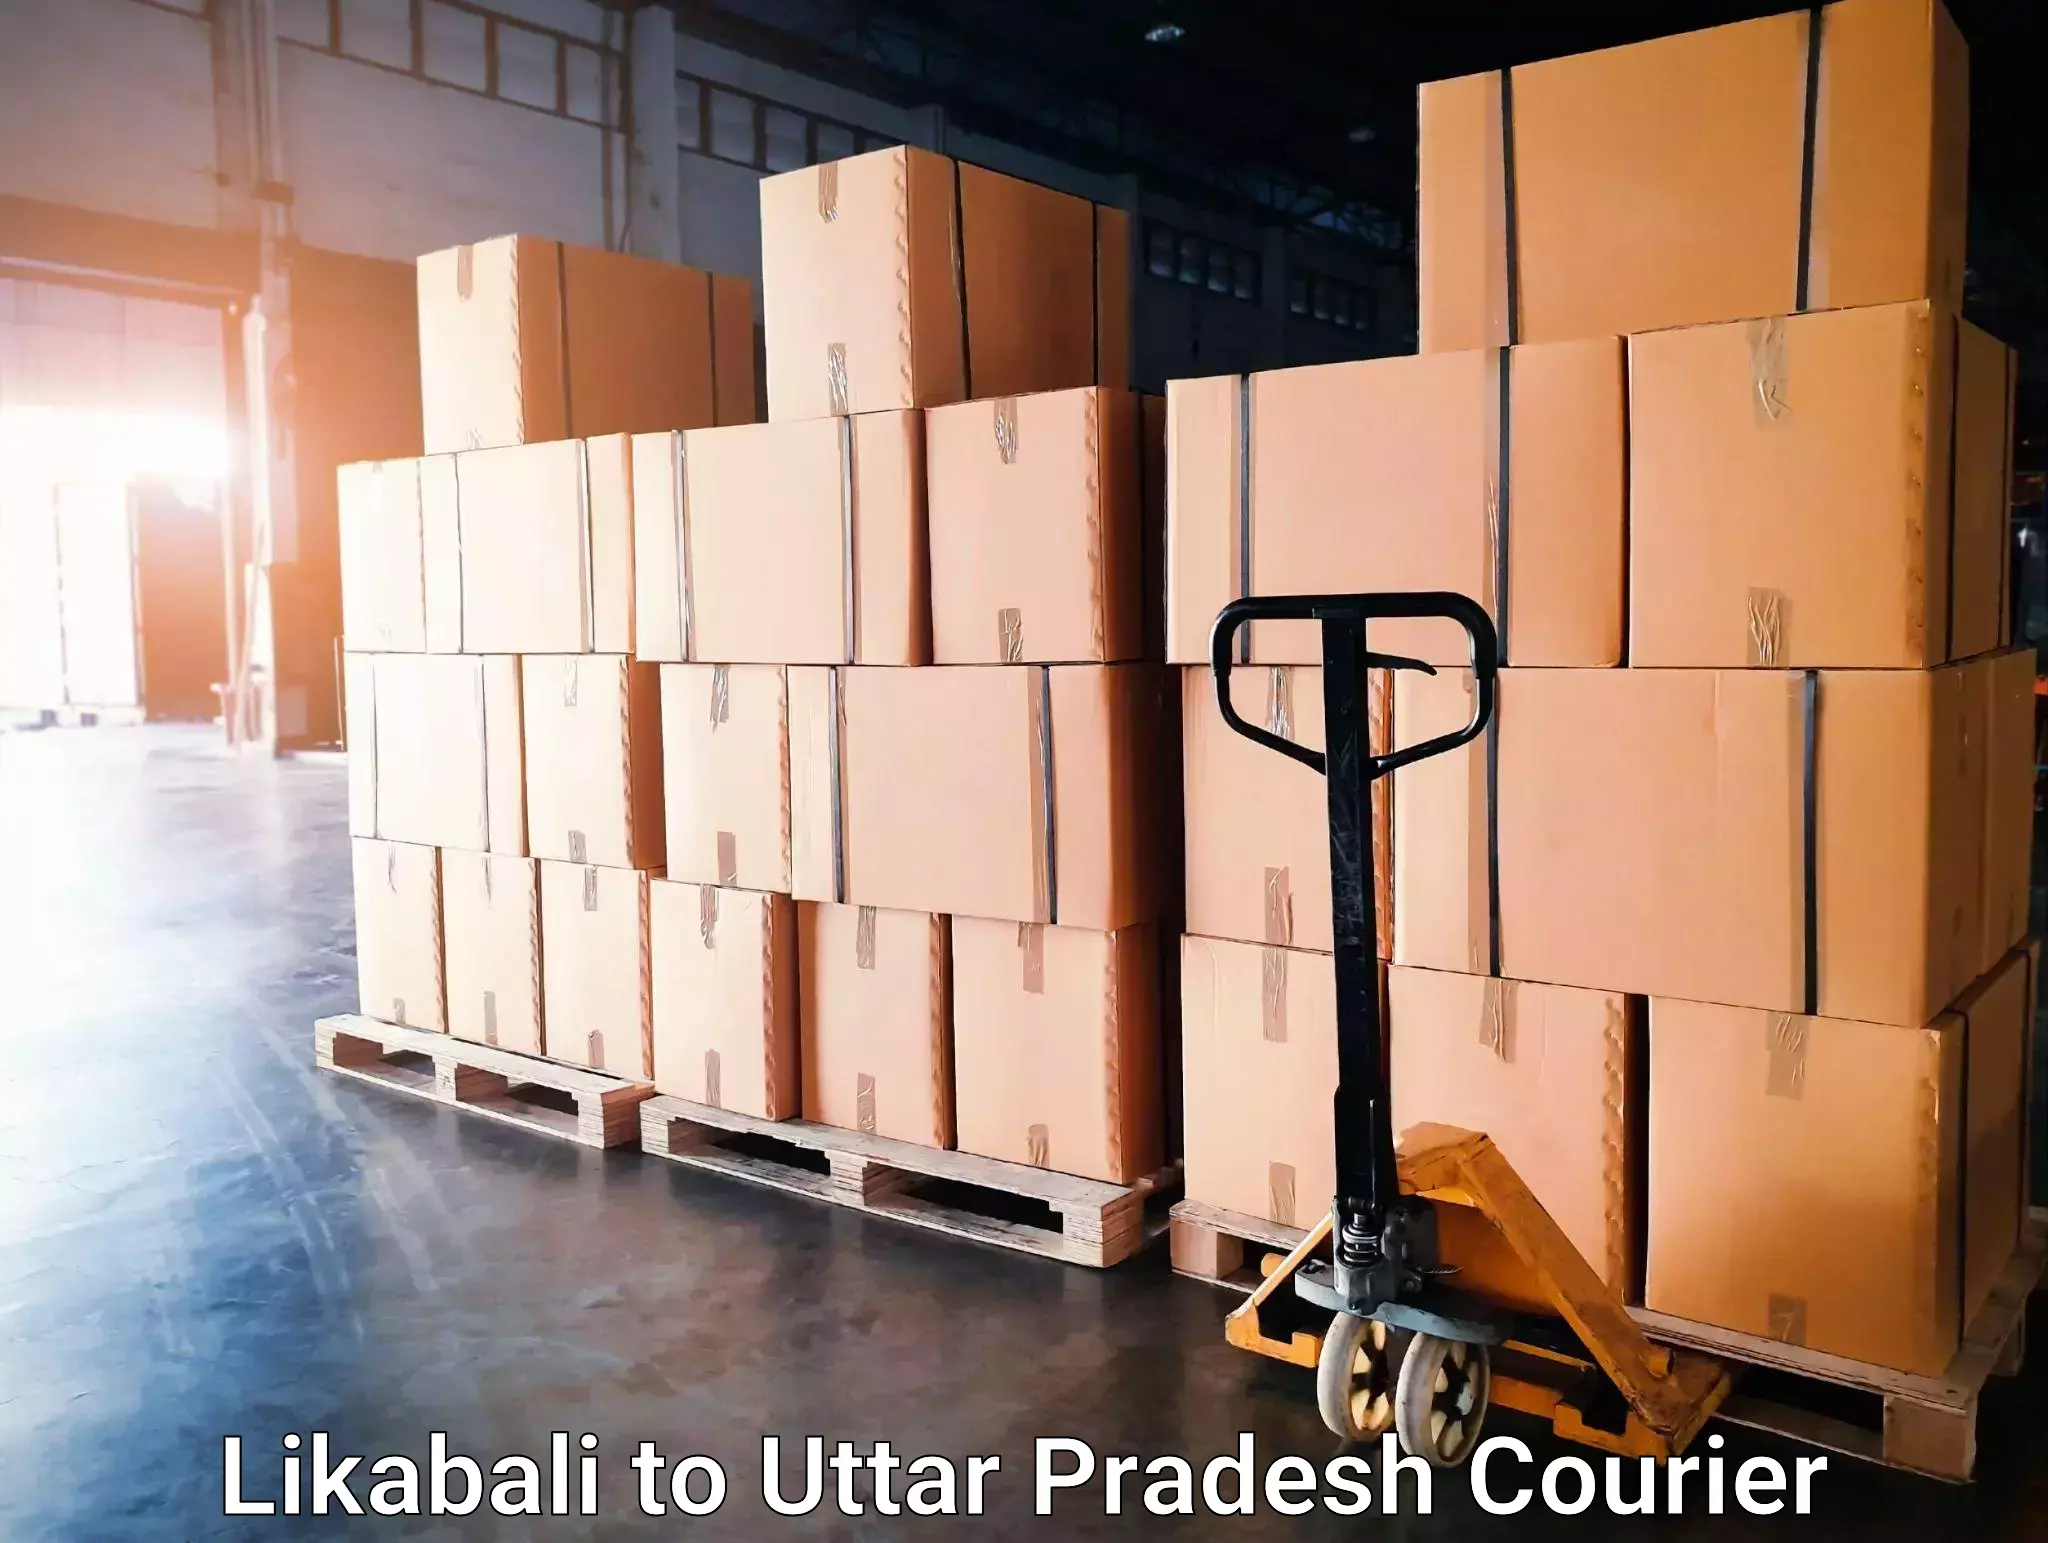 Global courier networks Likabali to Kanth